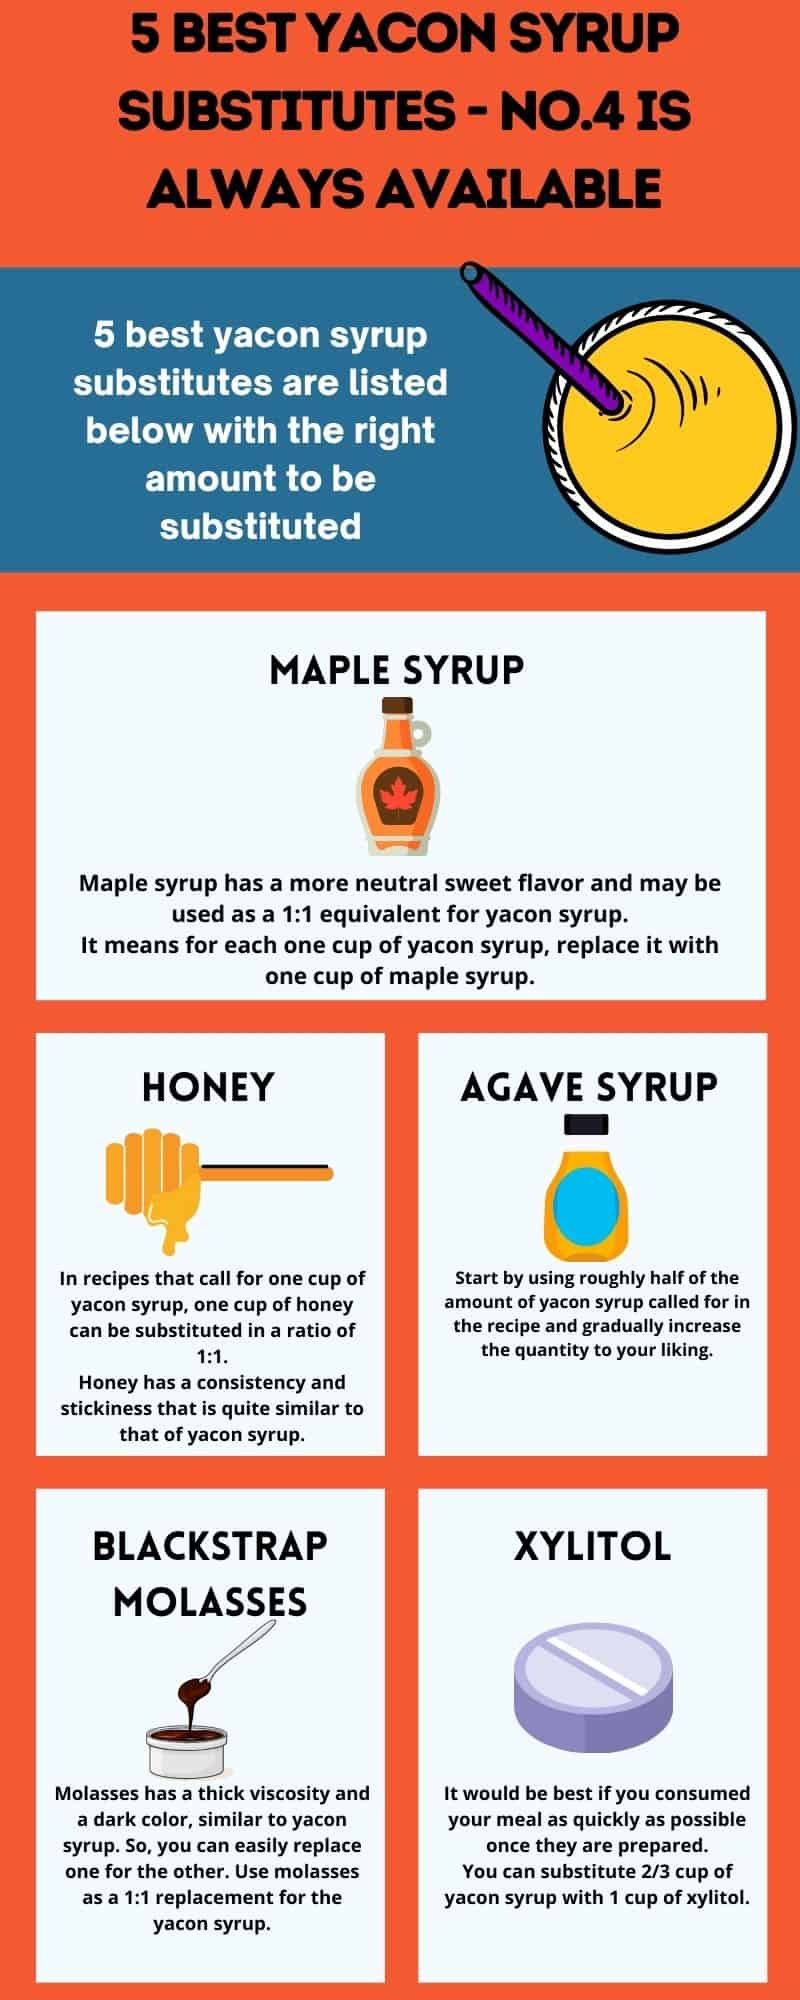 5 best yacon syrup substitutes explained